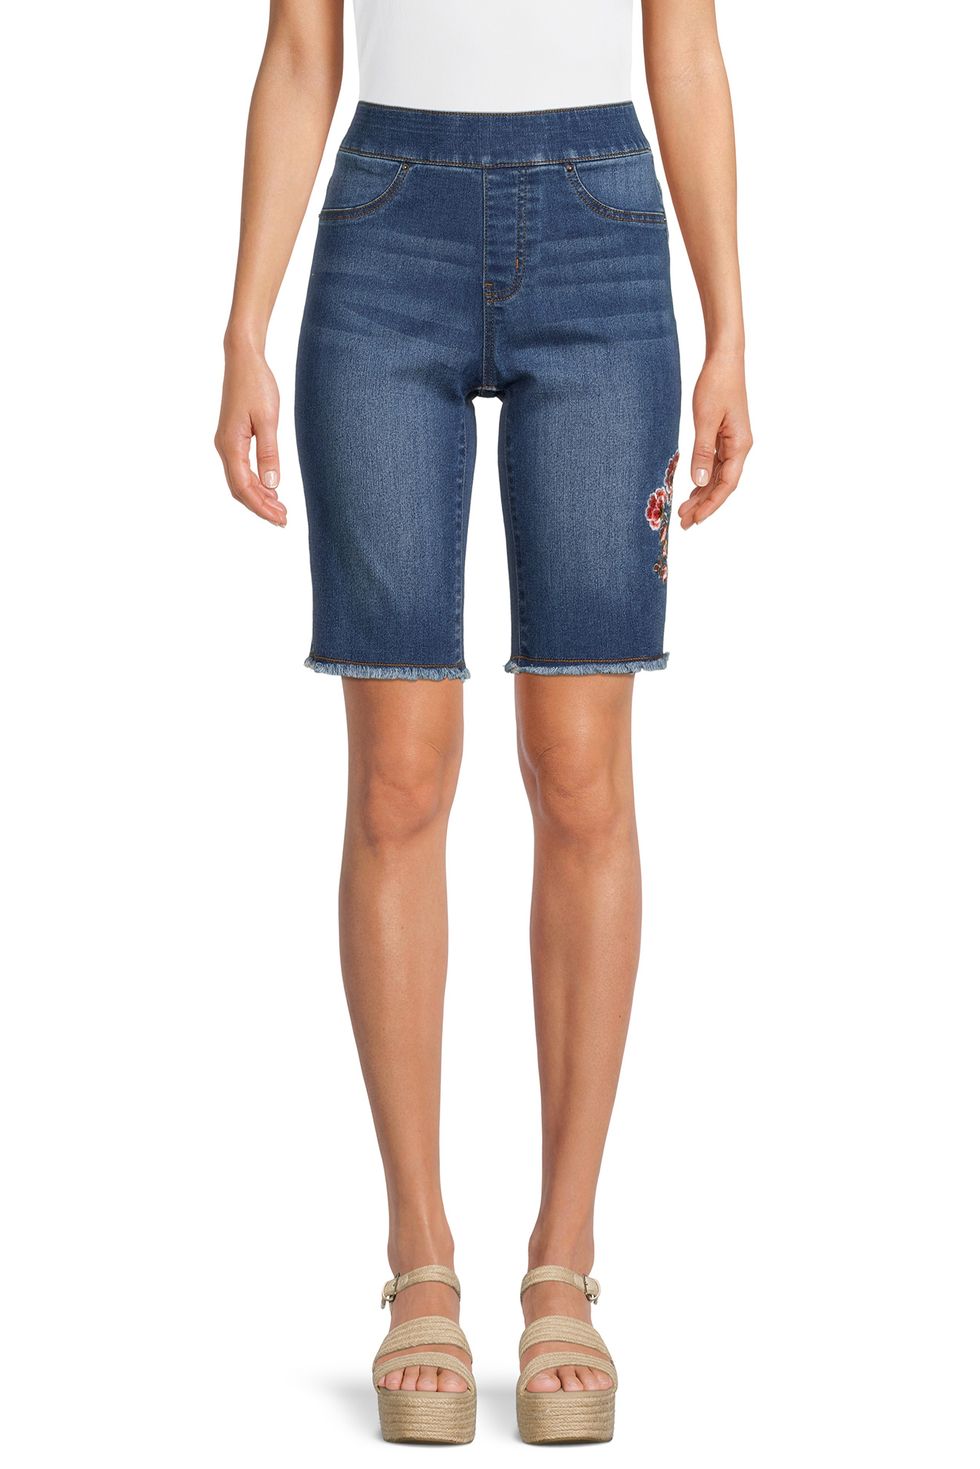 The Pioneer Woman Embroidered Bermuda Denim Shorts